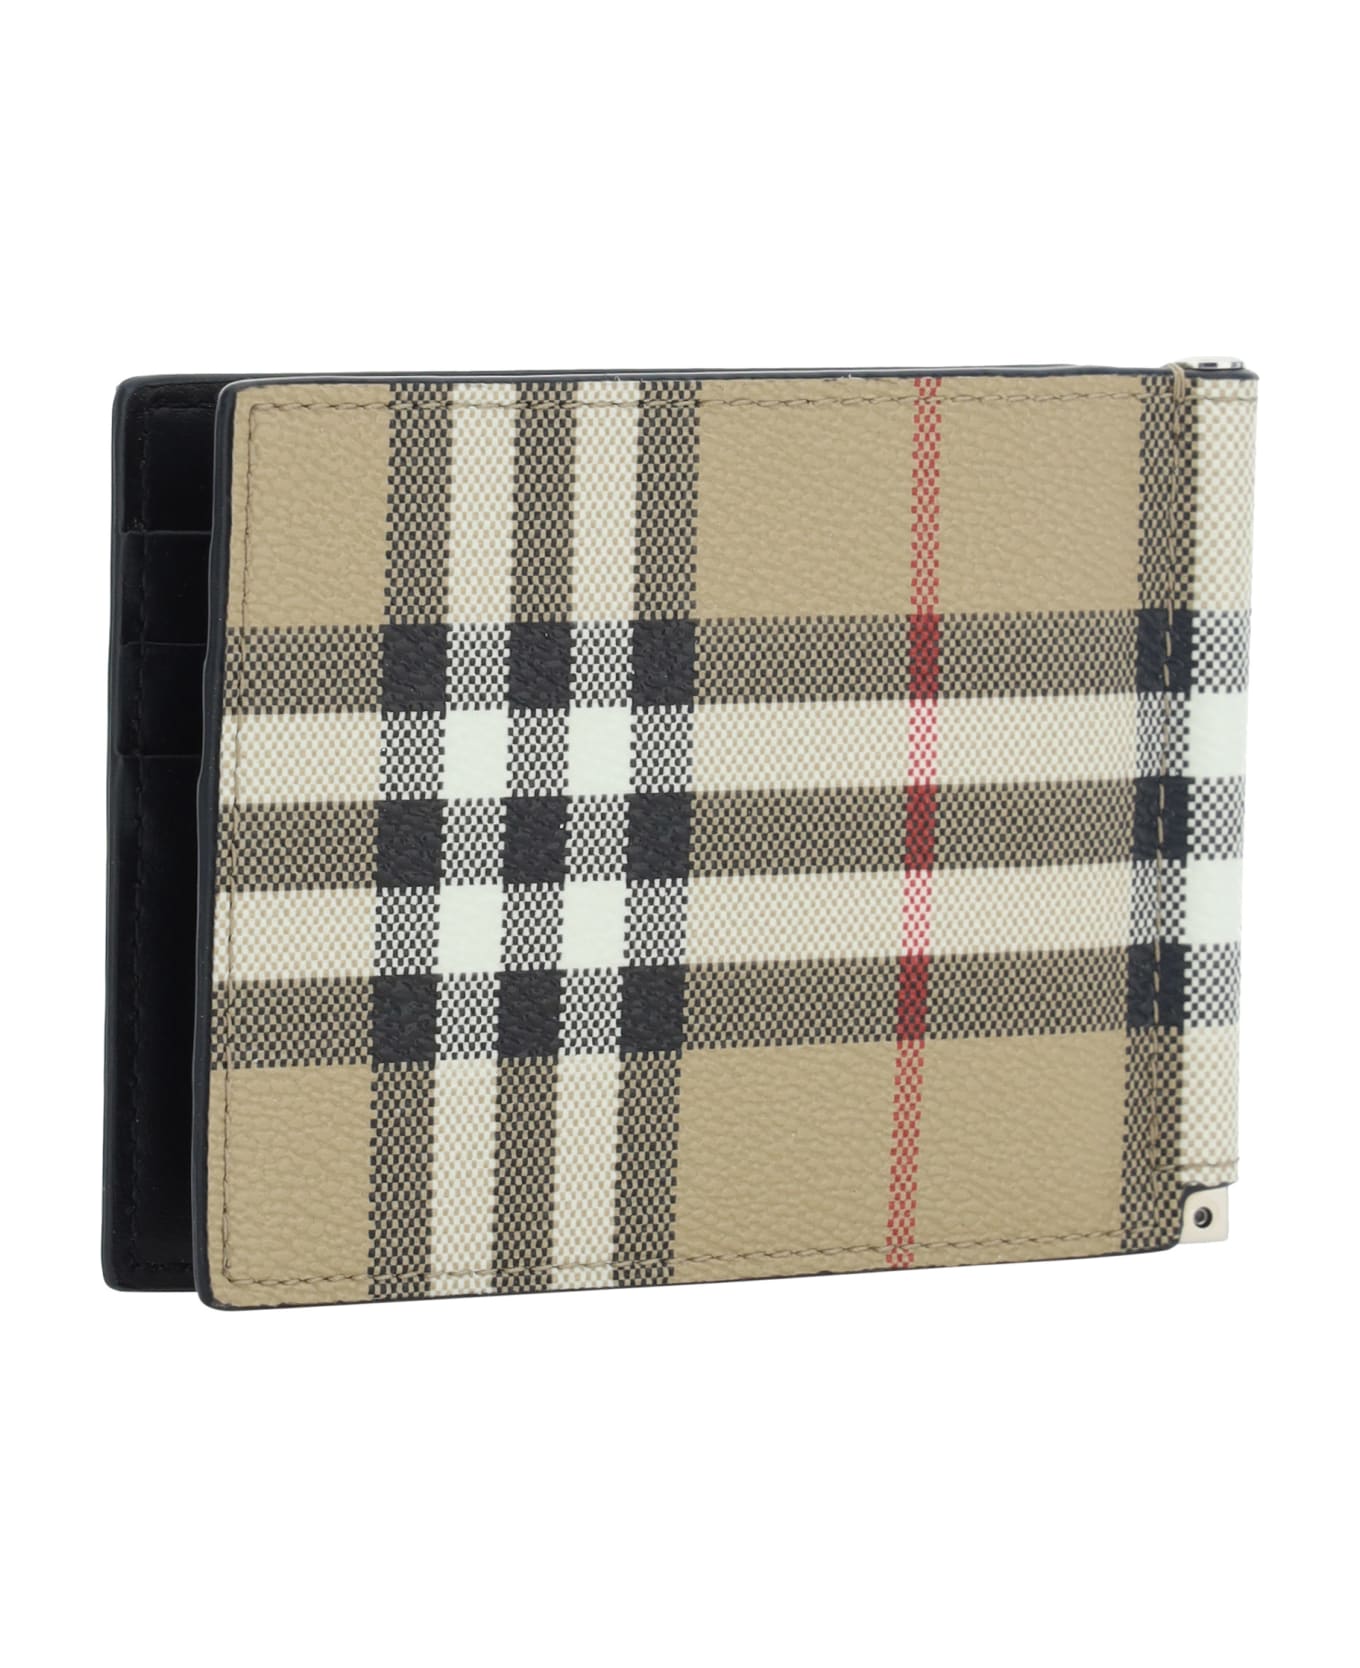 Burberry Chase Wallet - Beige